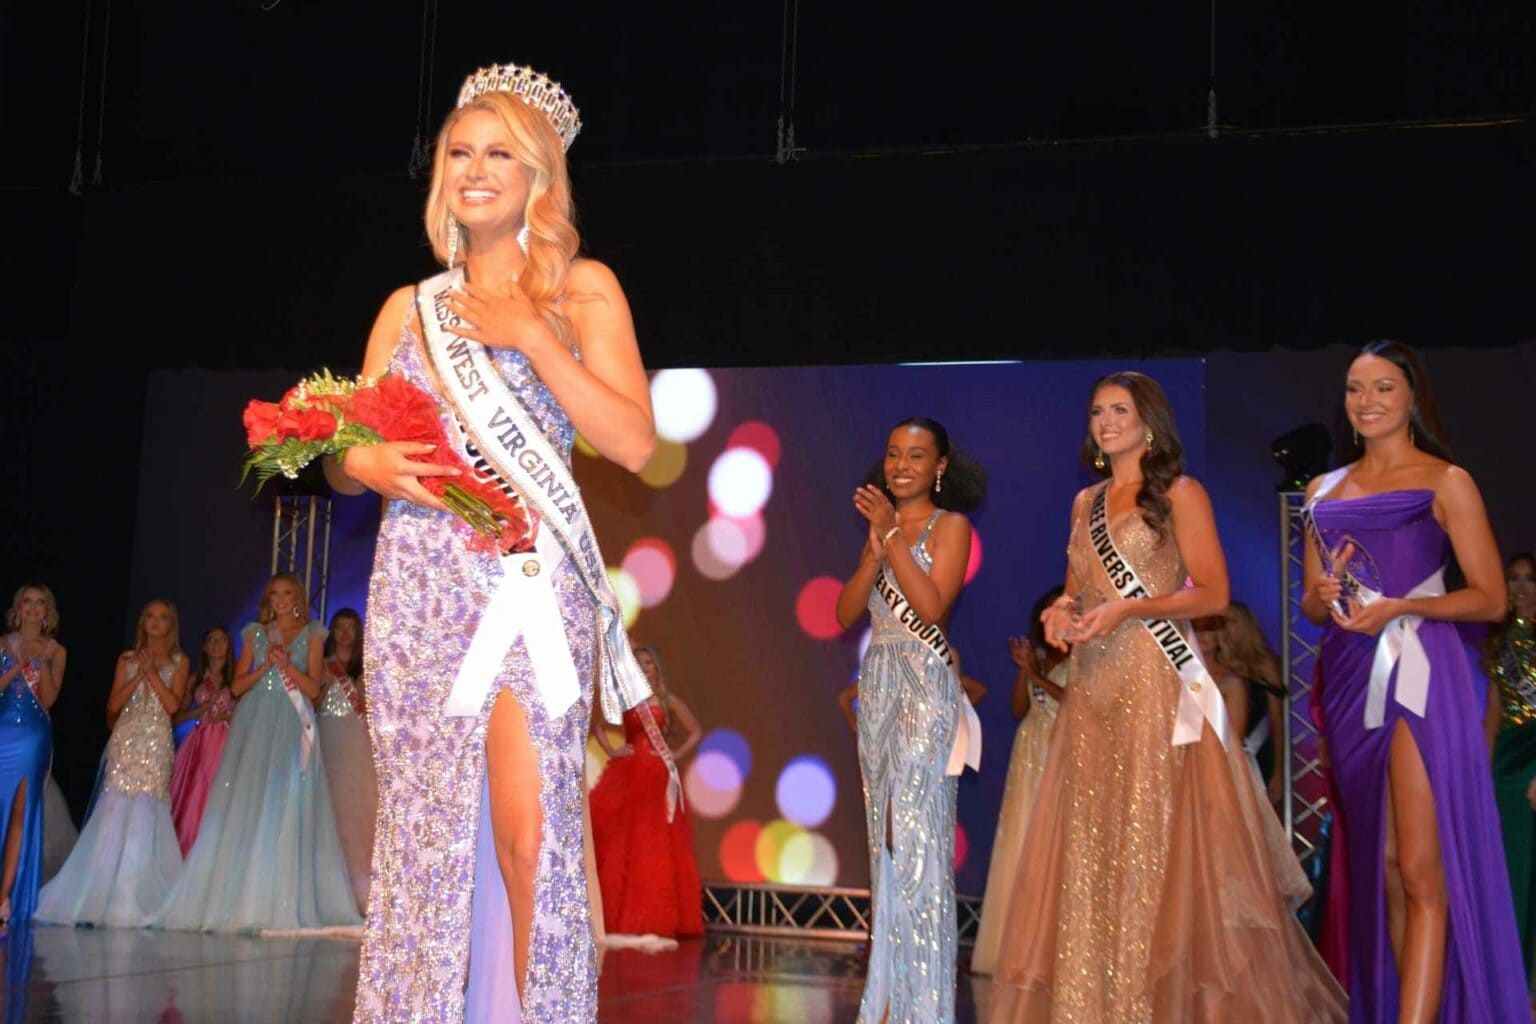 native wins Miss West Virginia USA 2022 title